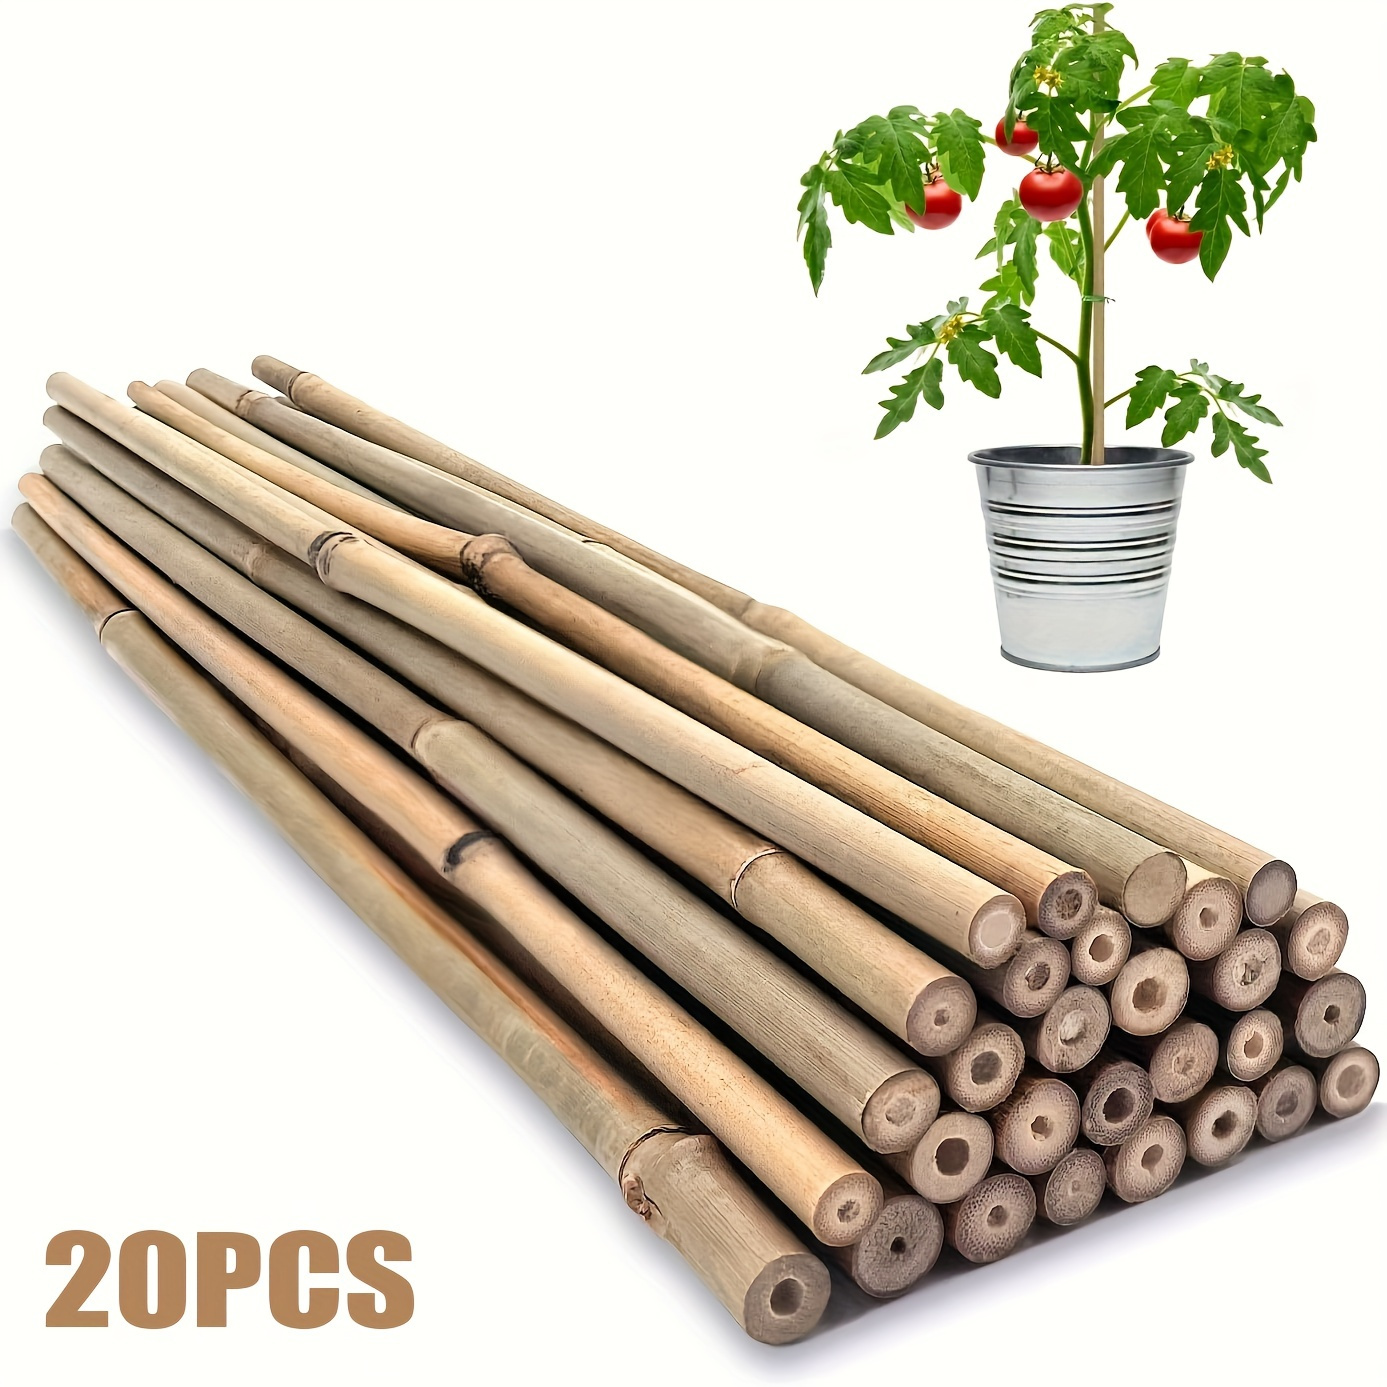 

20pcs, 16 Inches Natural Bamboo Plant Stakes, Durable Garden Support Sticks For Tomatoes, Beans, Vegetables Potted Plants, Easy Insertion Soil Sticks